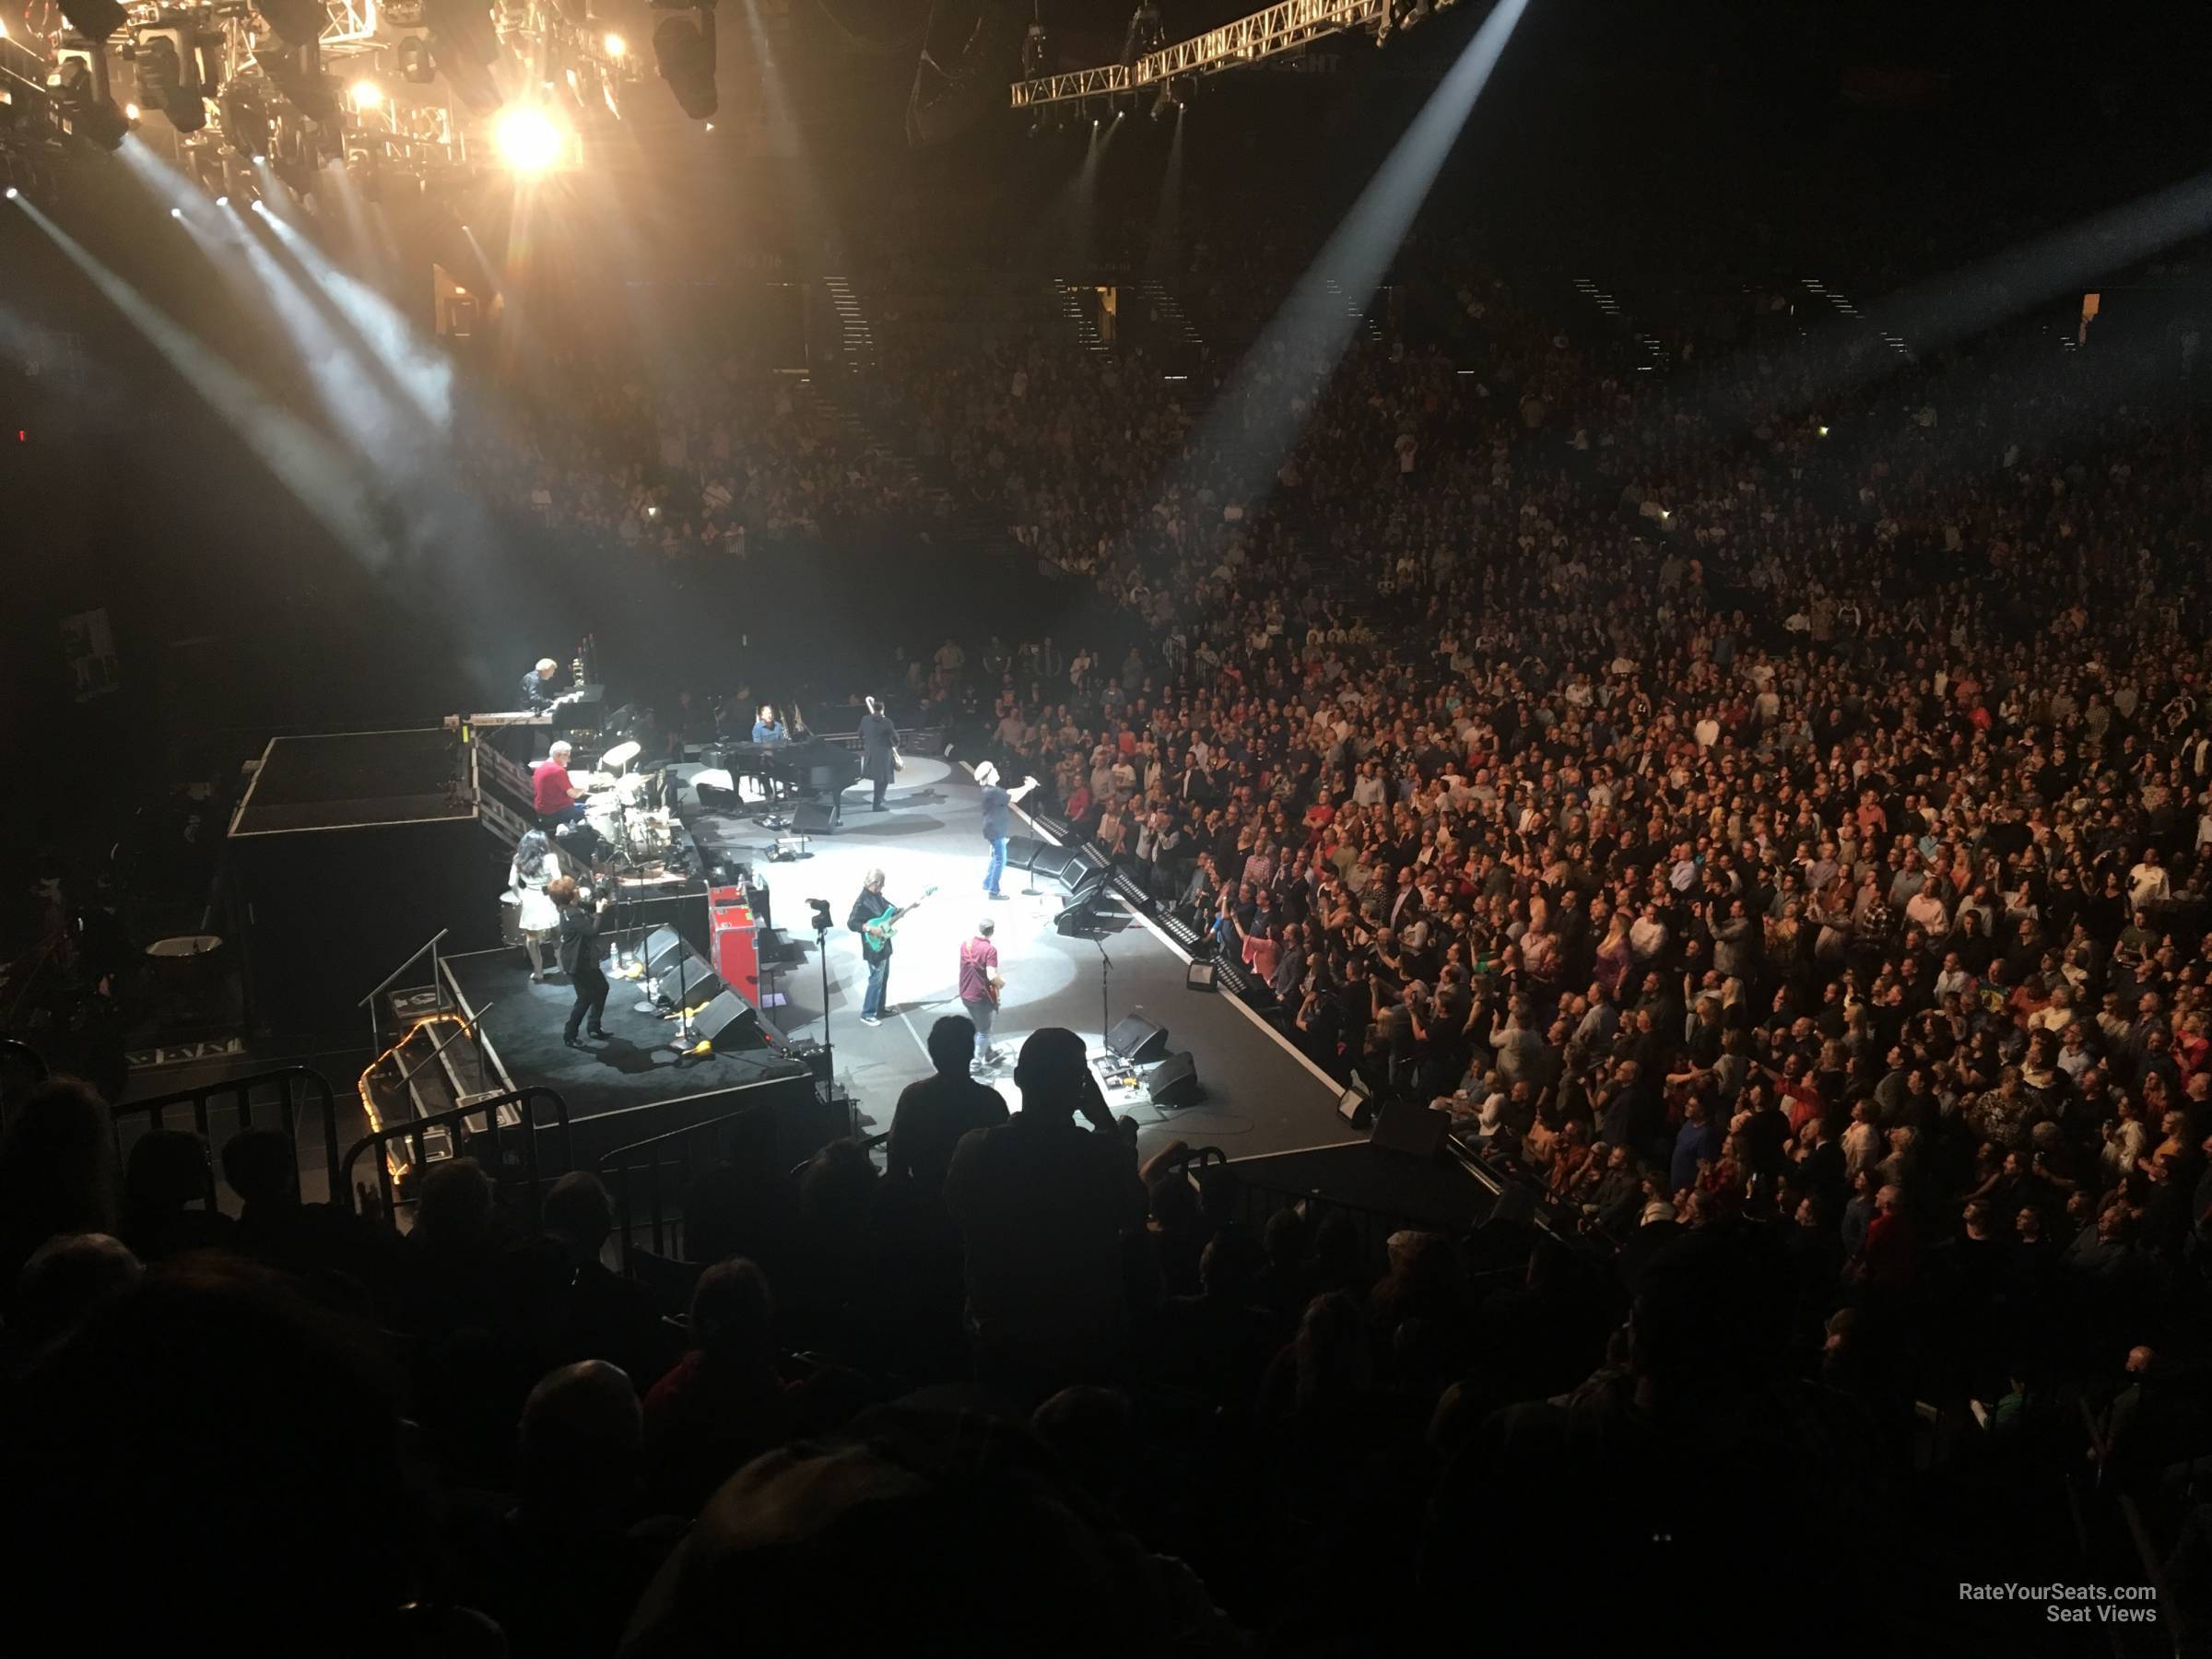 section 21, row x seat view  - mgm grand garden arena